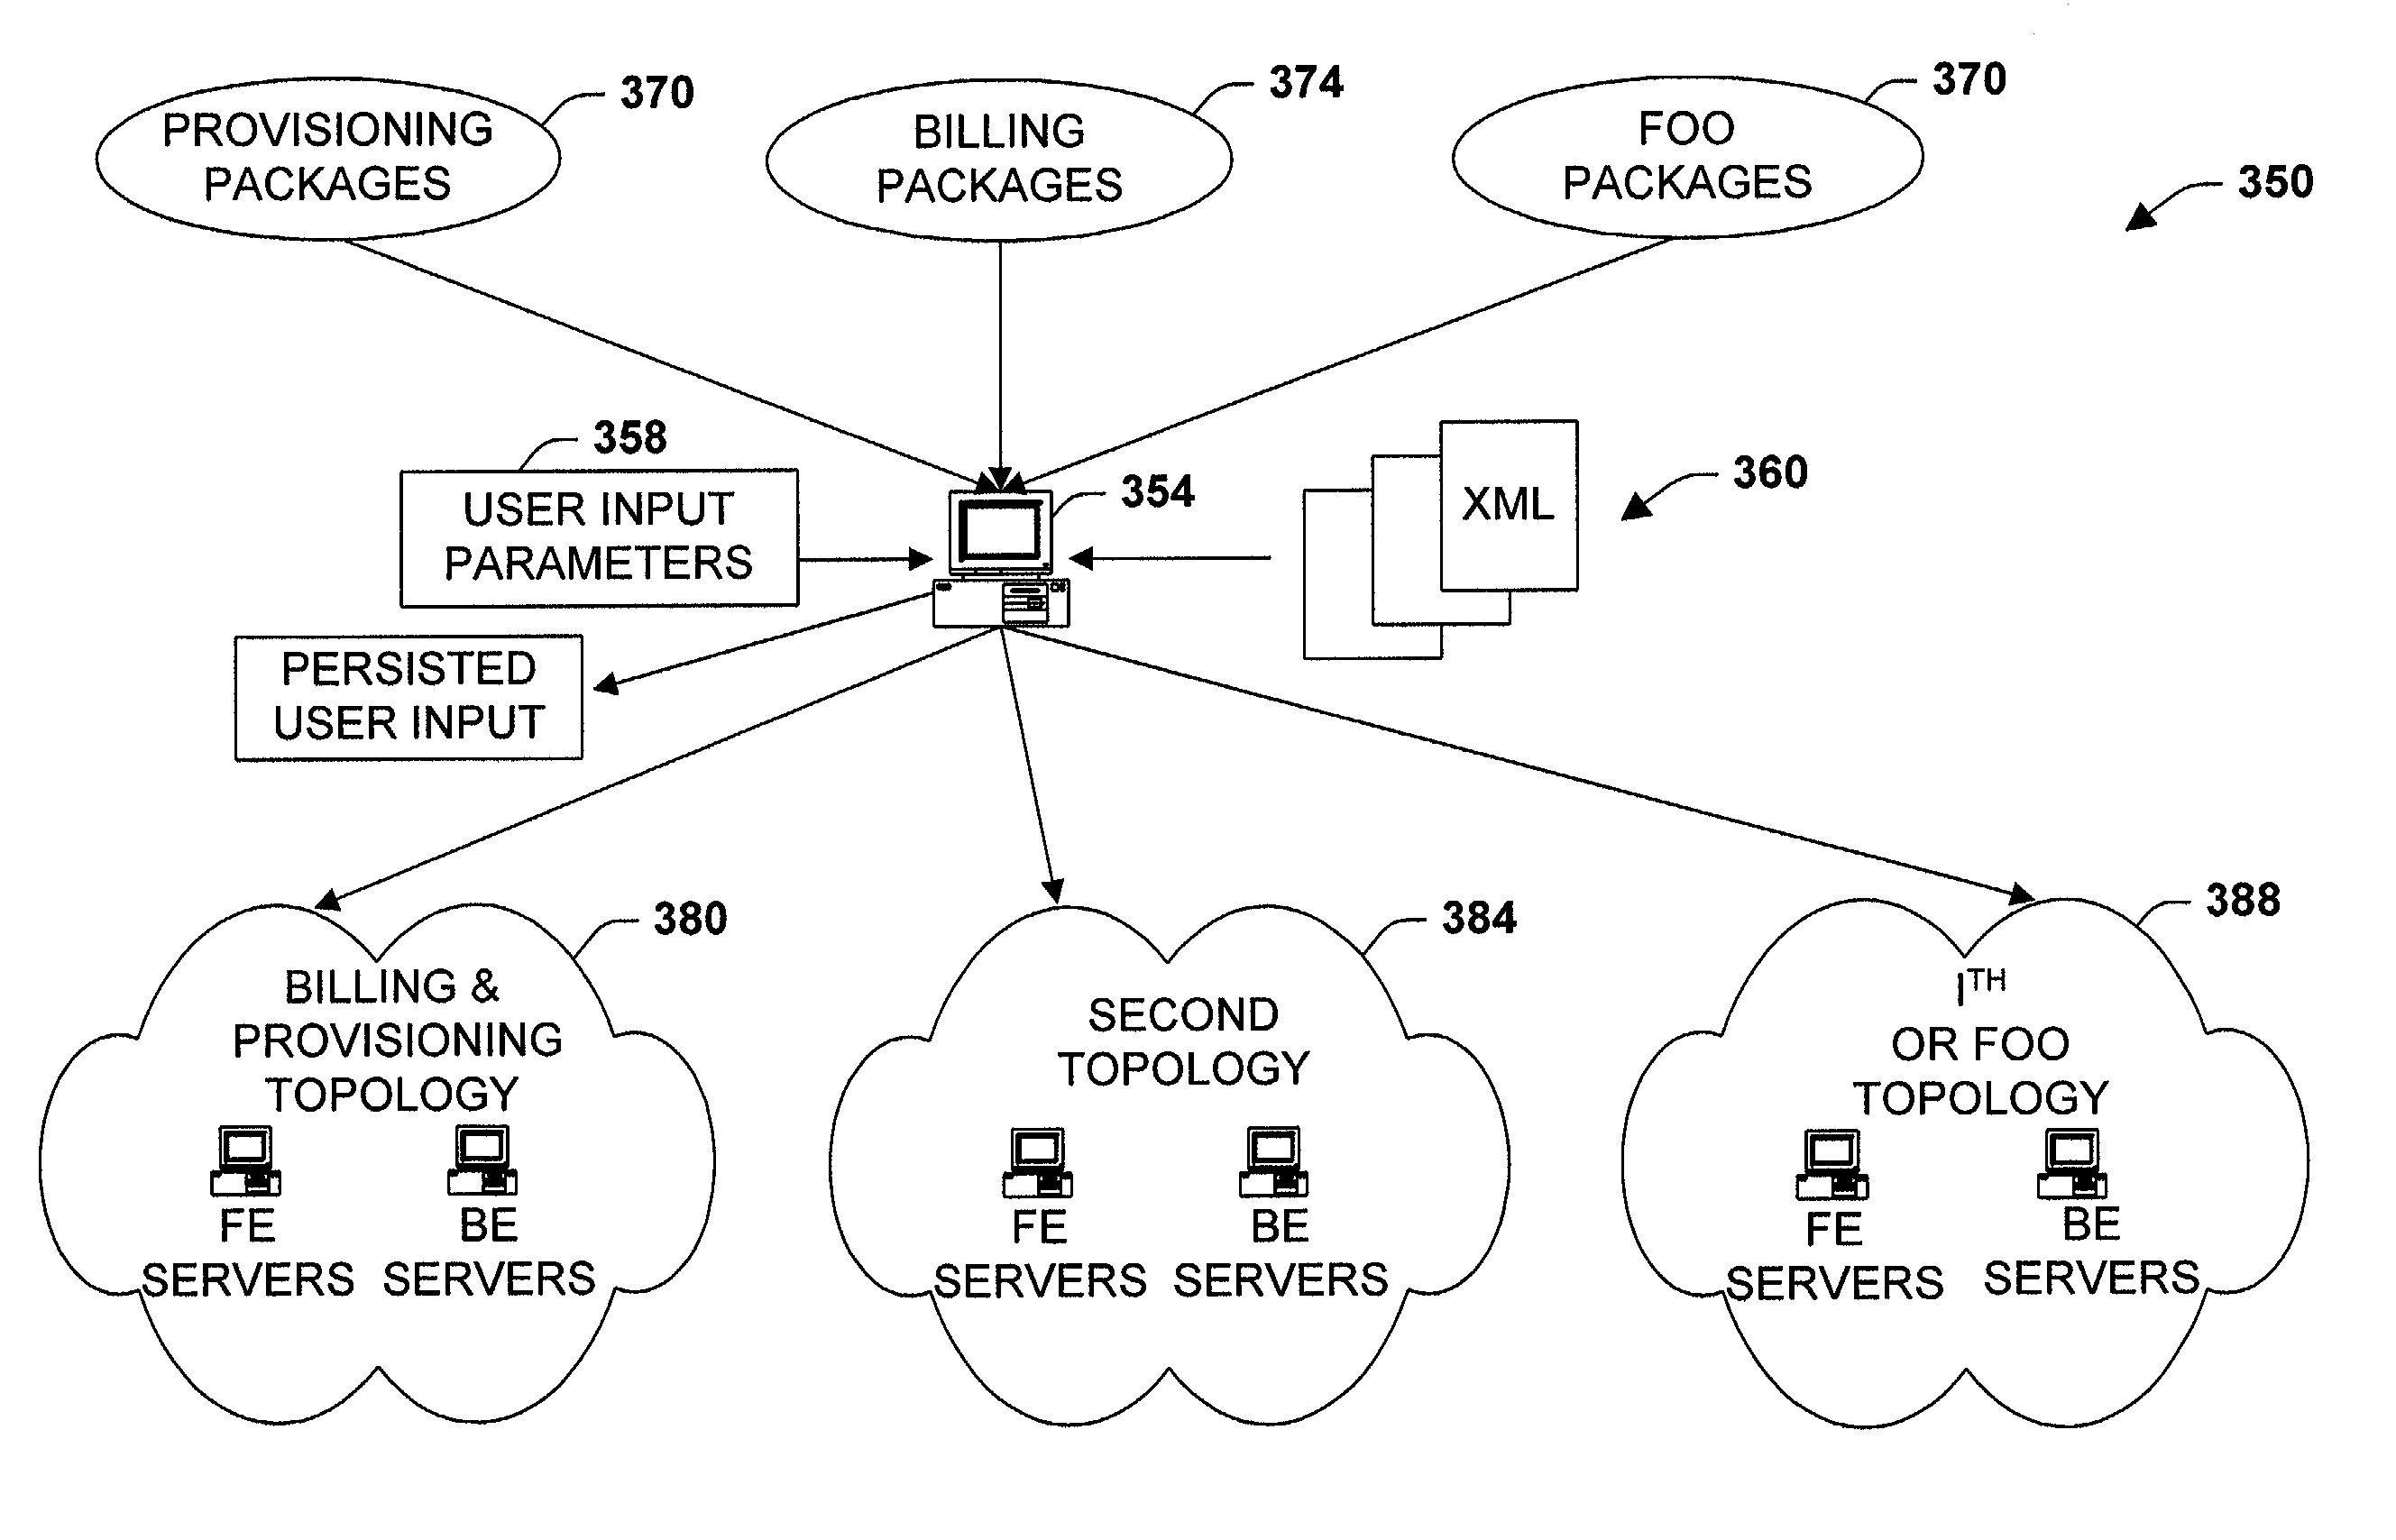 System and method to facilitate manageable and agile deployment of services in accordance with various topologies